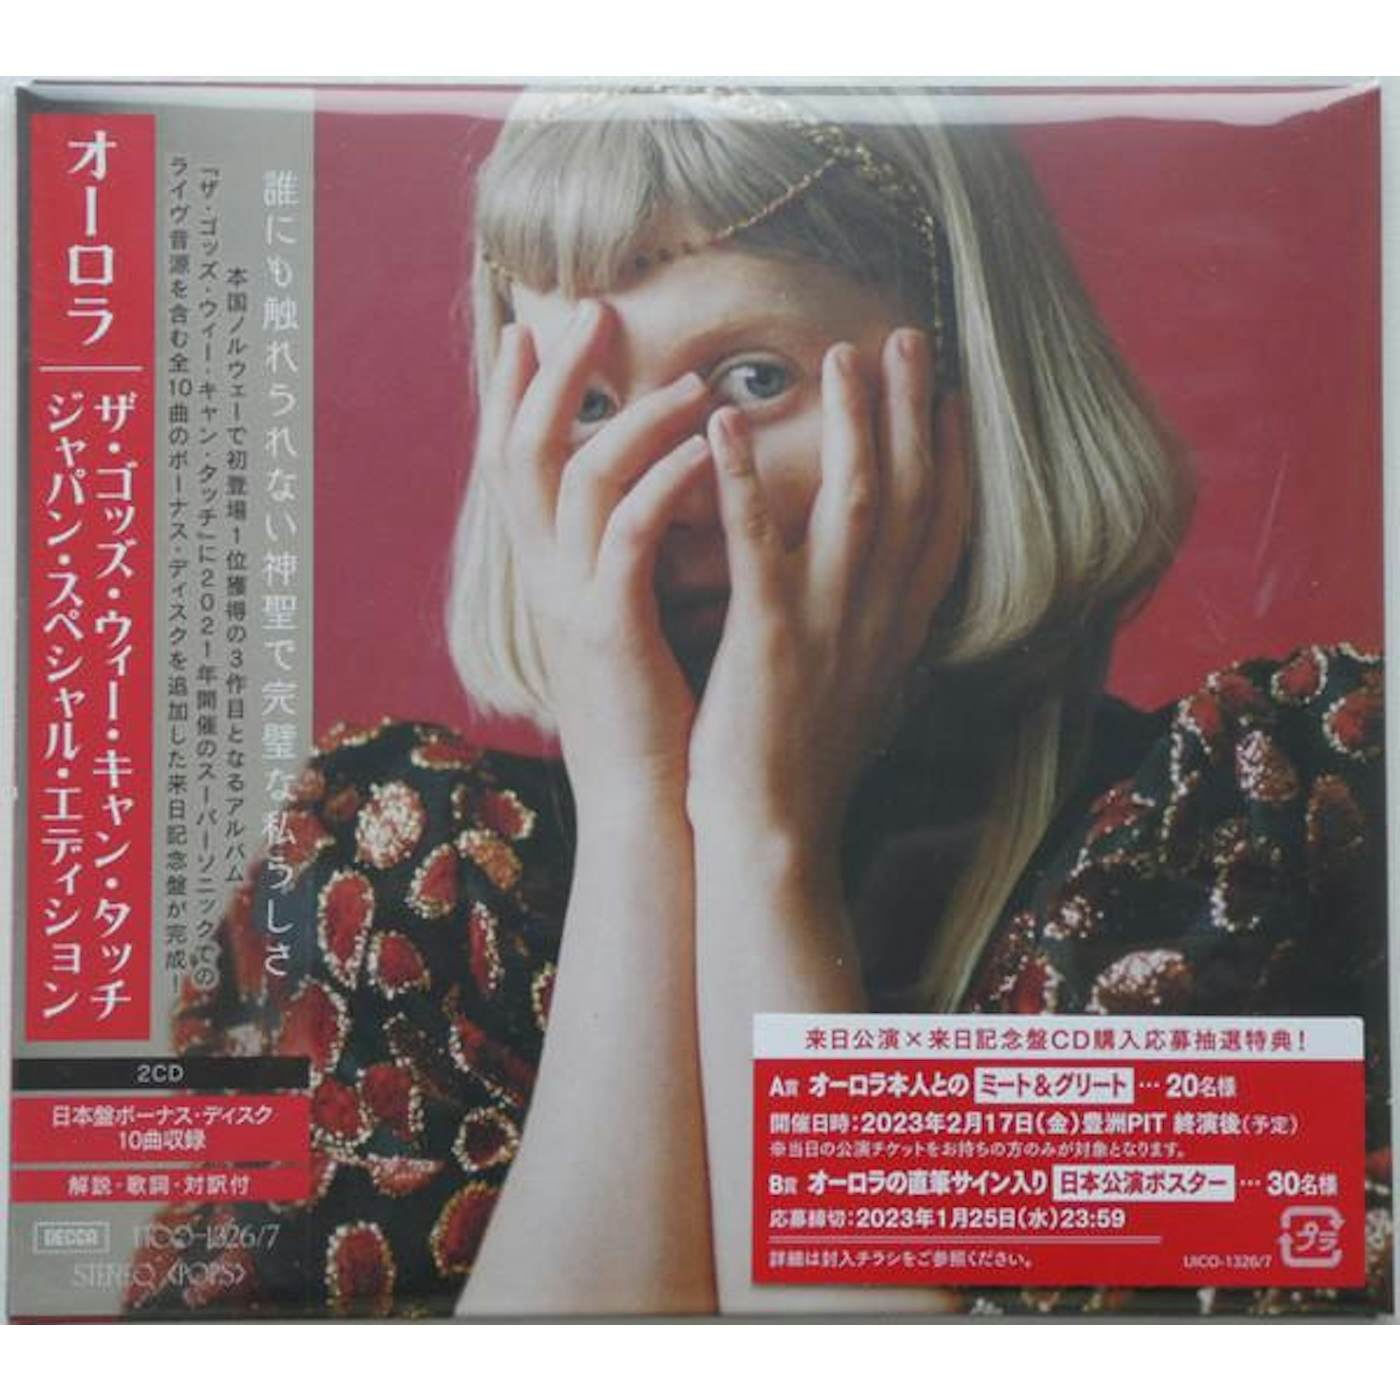 AURORA GODS WE CAN TOUCH (JAPAN SPECIAL EDITION) (2CD) CD